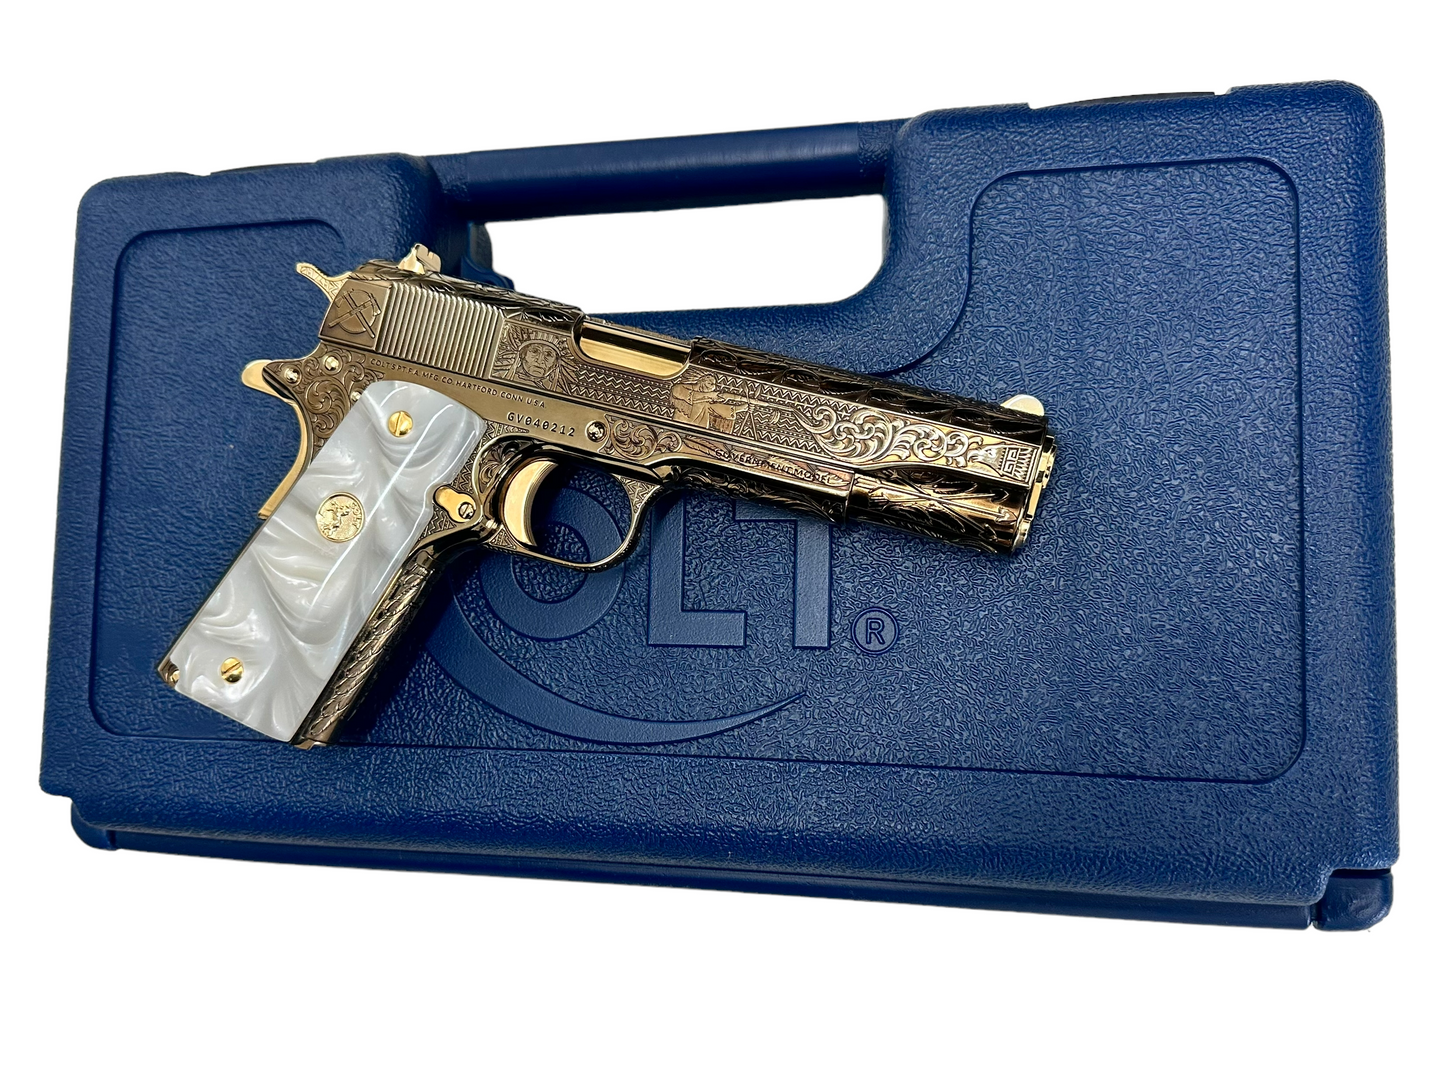 COLT CUSTOM 1911 FULLY ENGRAVED FREEDOM NITRO BRONZE PLATED WITH 24K GOLD ACCENTS.